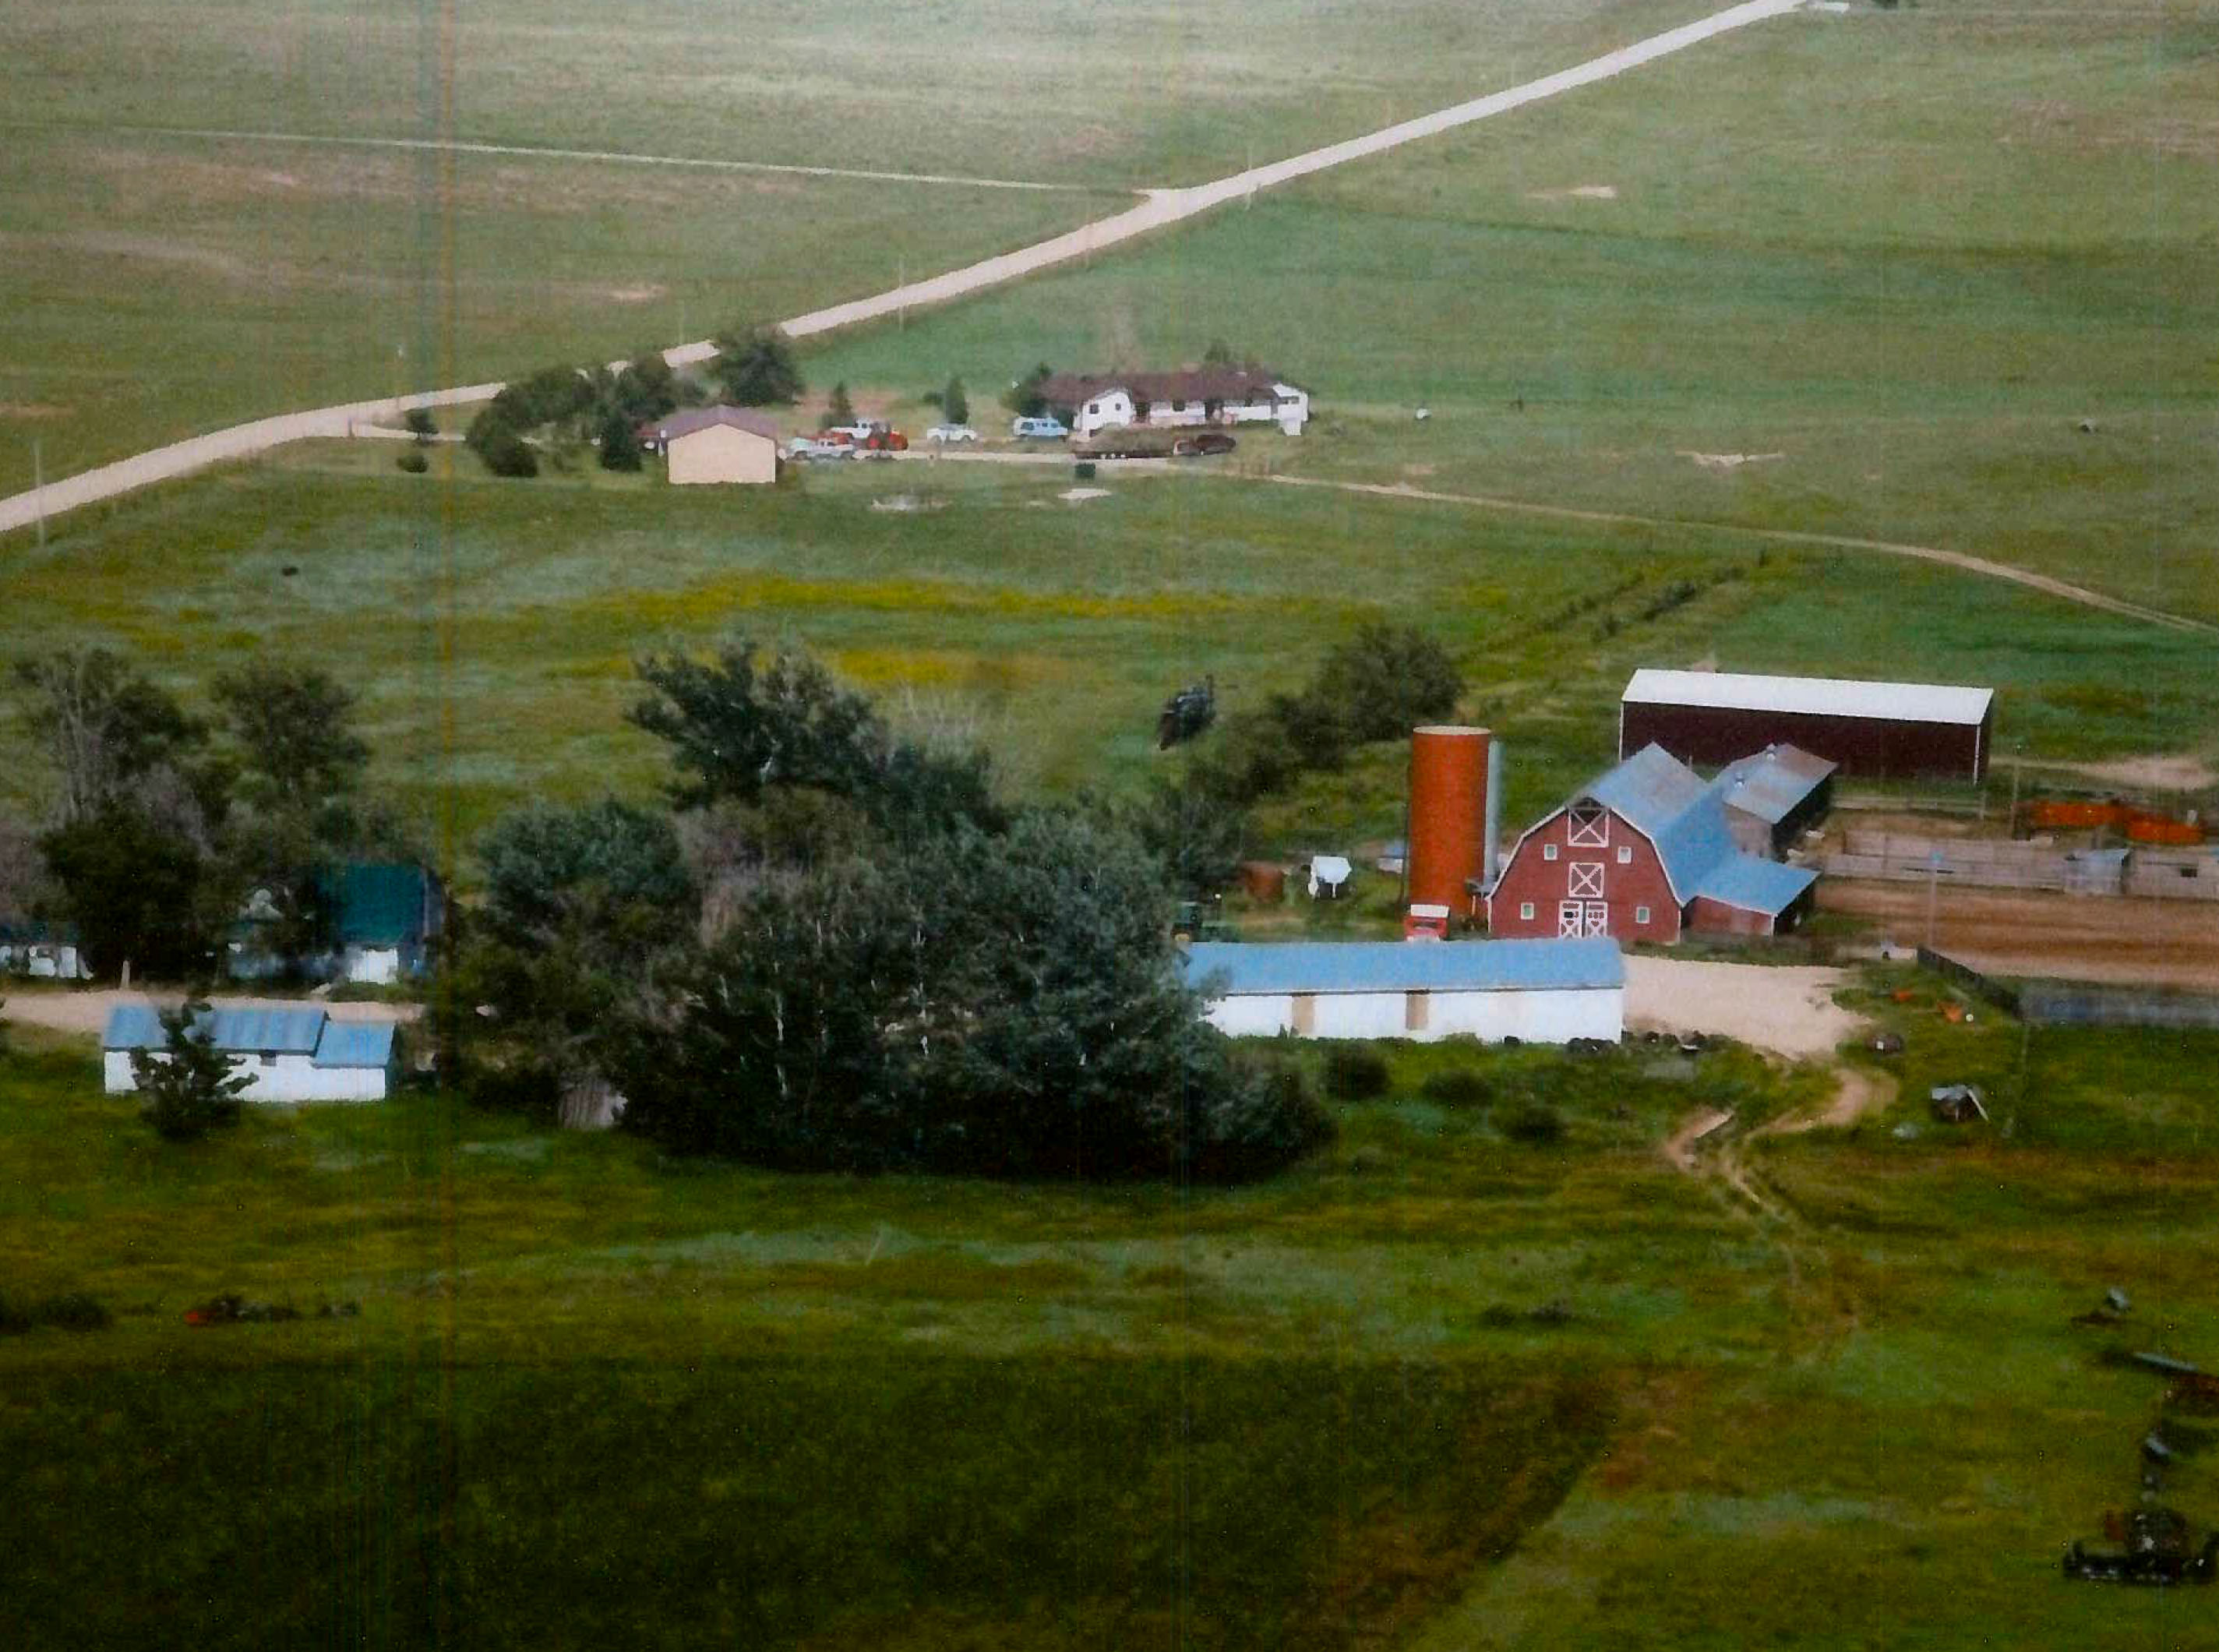 Aerial view of the George Eurich Farm.